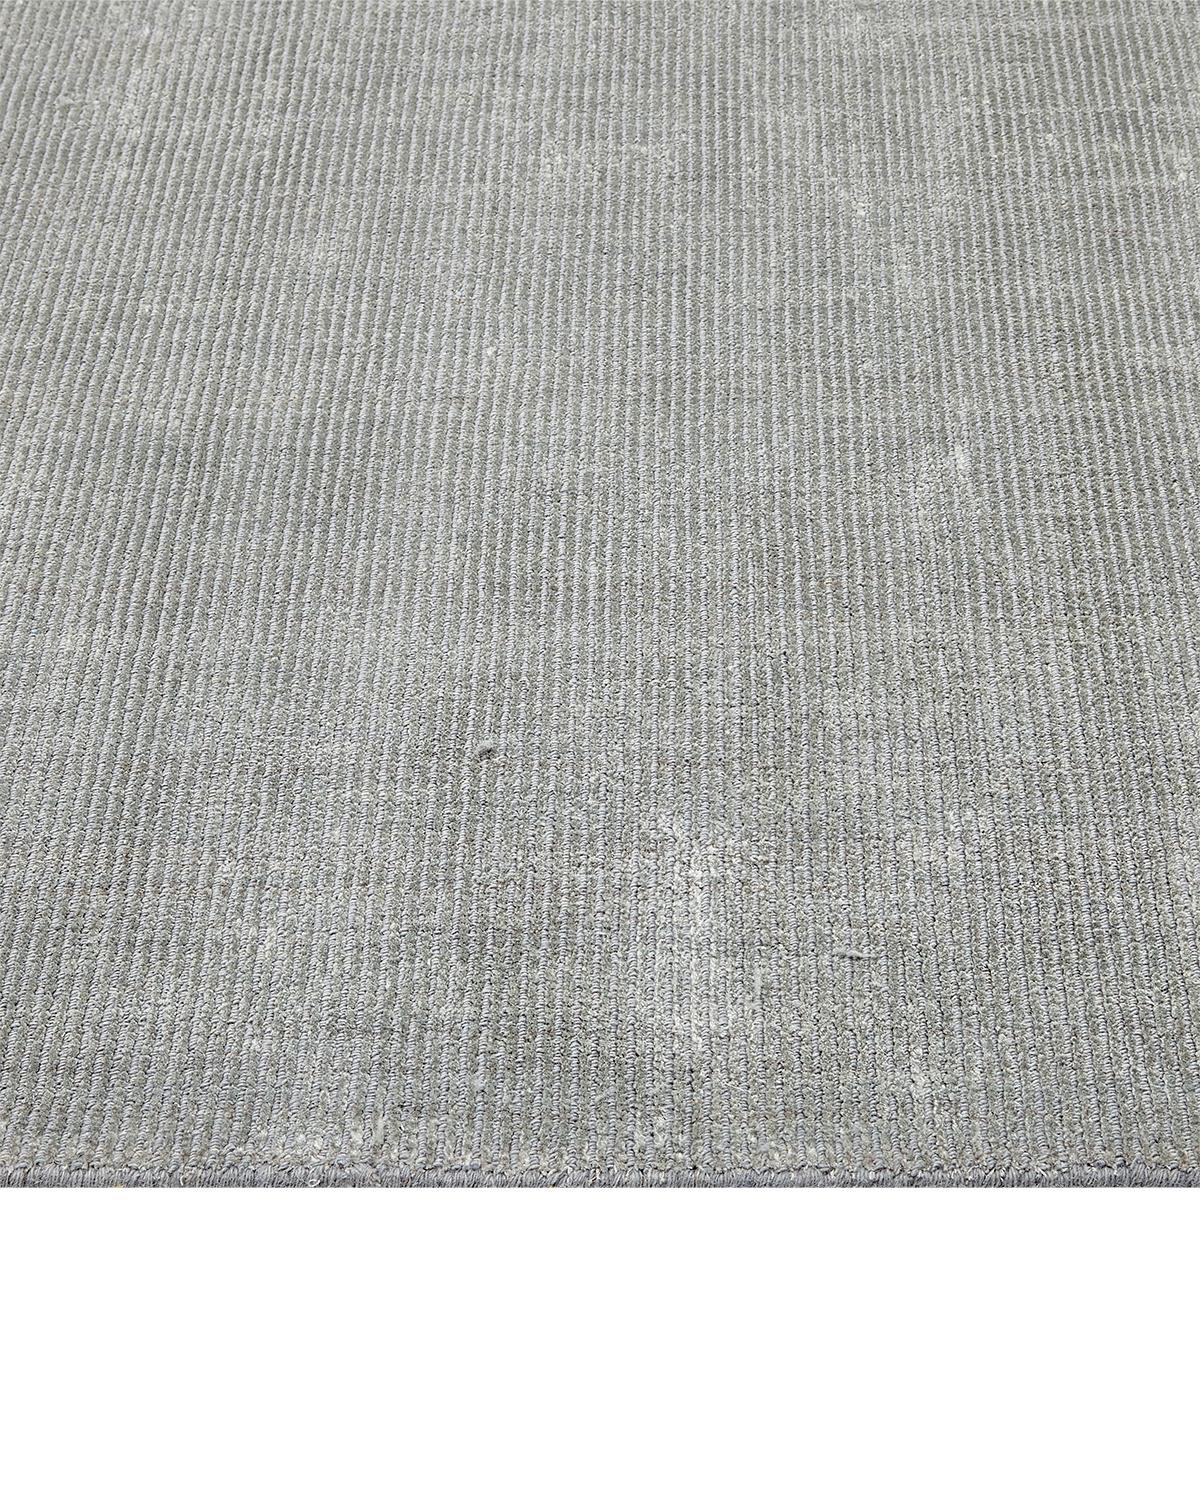 Indian Solo Rugs Solid Modern Hand Loomed Gray Runner Area Rug For Sale